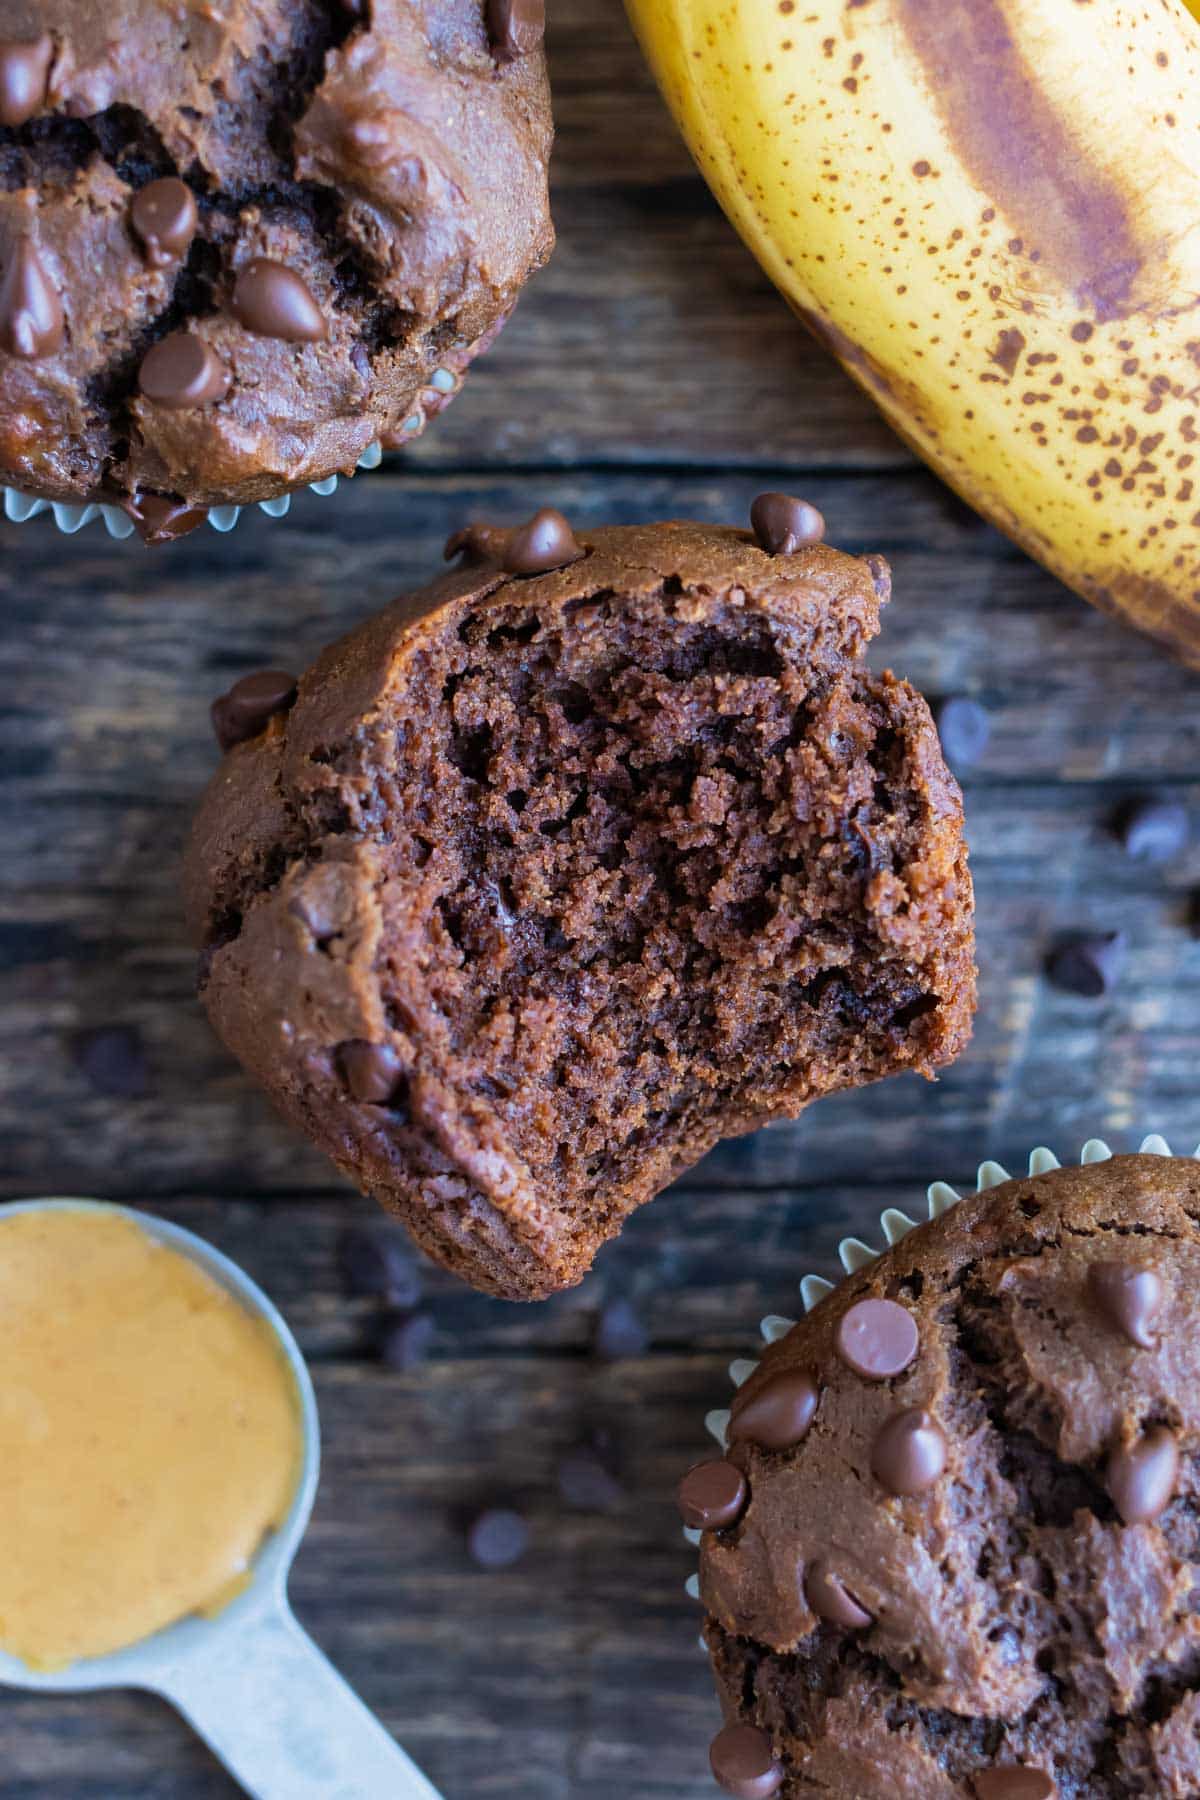 A chocolate muffin with a bite taken out of it, is laid on the counter next to ingredients from this recipe.